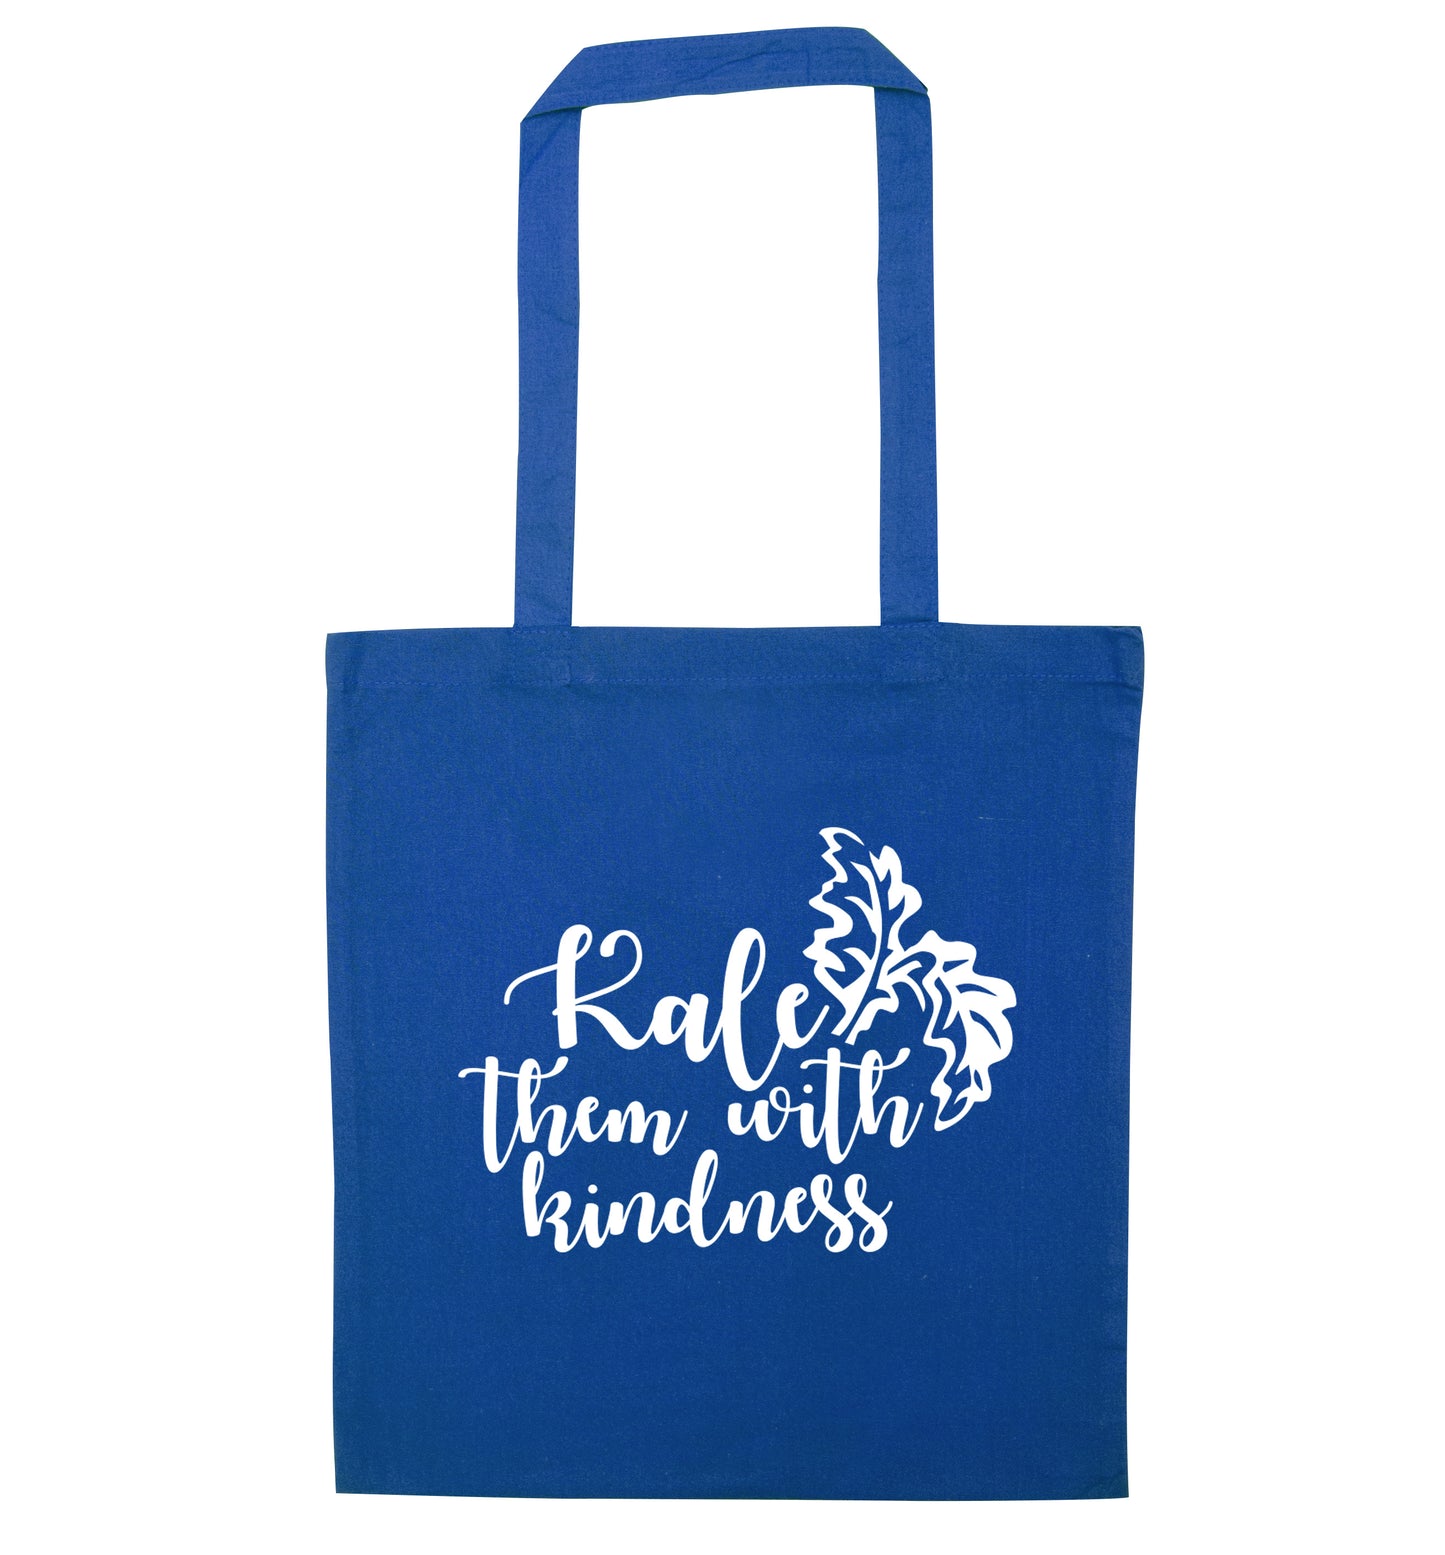 Kale them with kindness blue tote bag